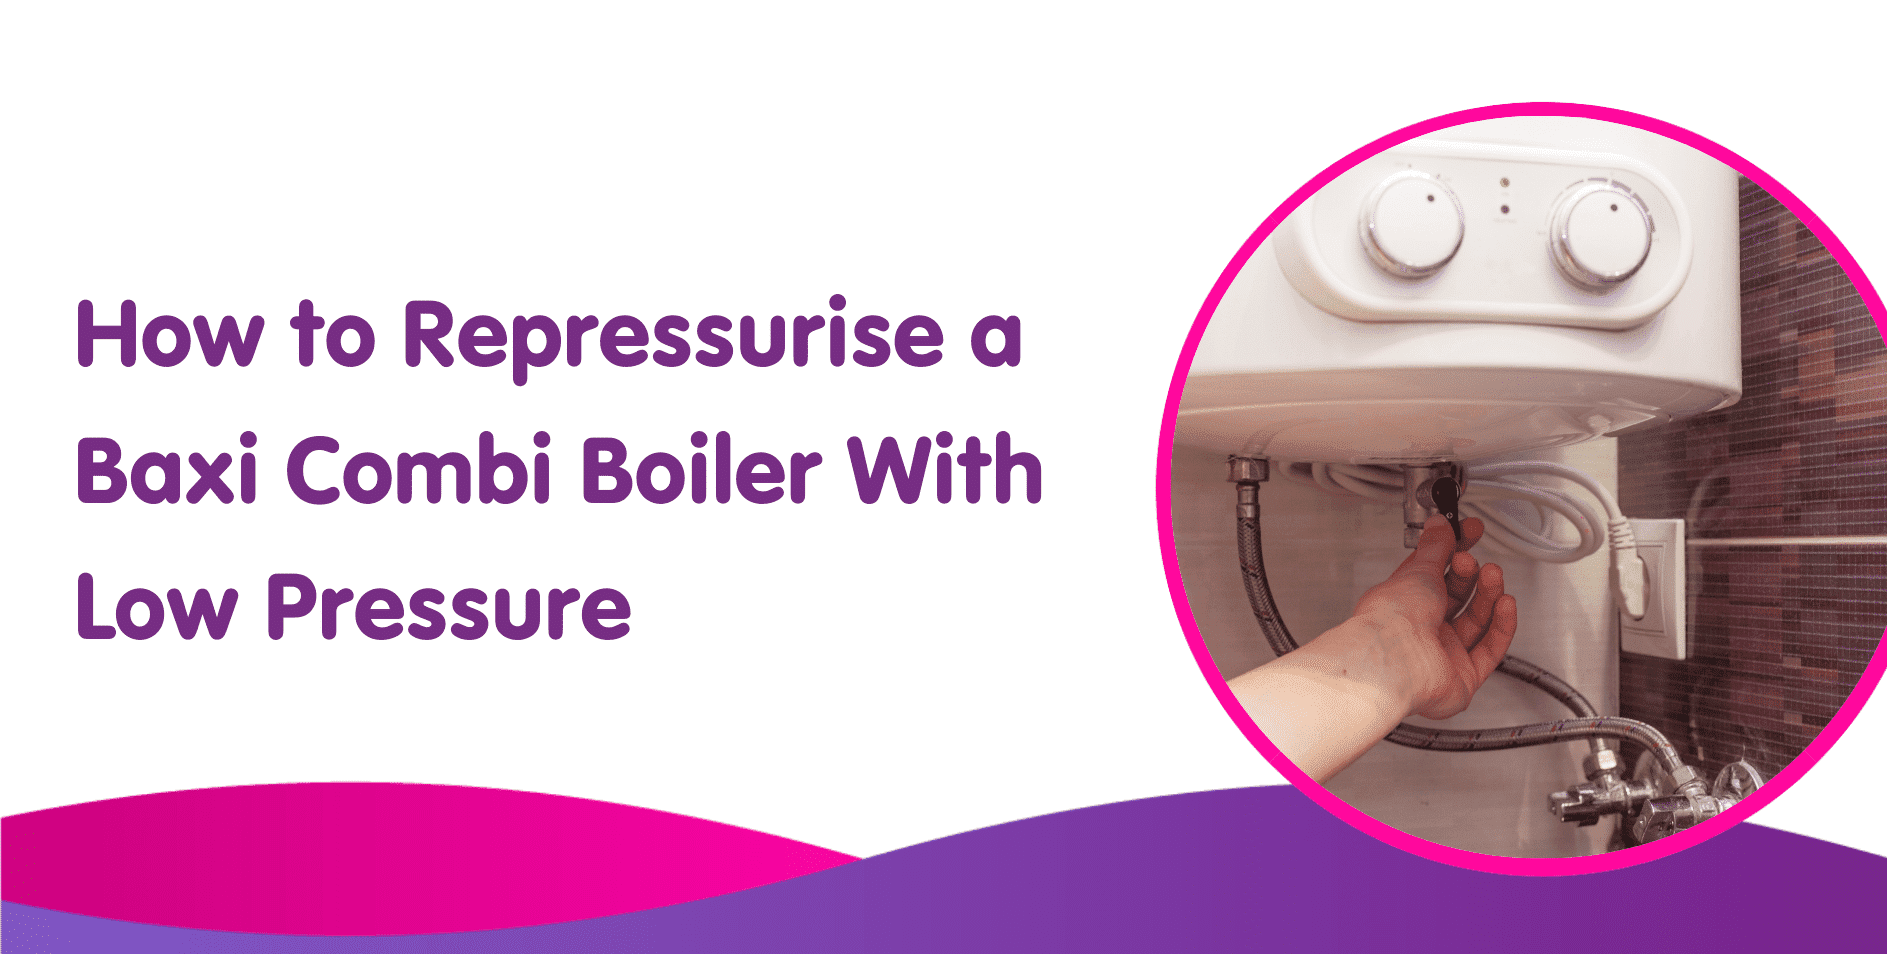 How to Repressurise a Baxi Combi Boiler With Low Pressure